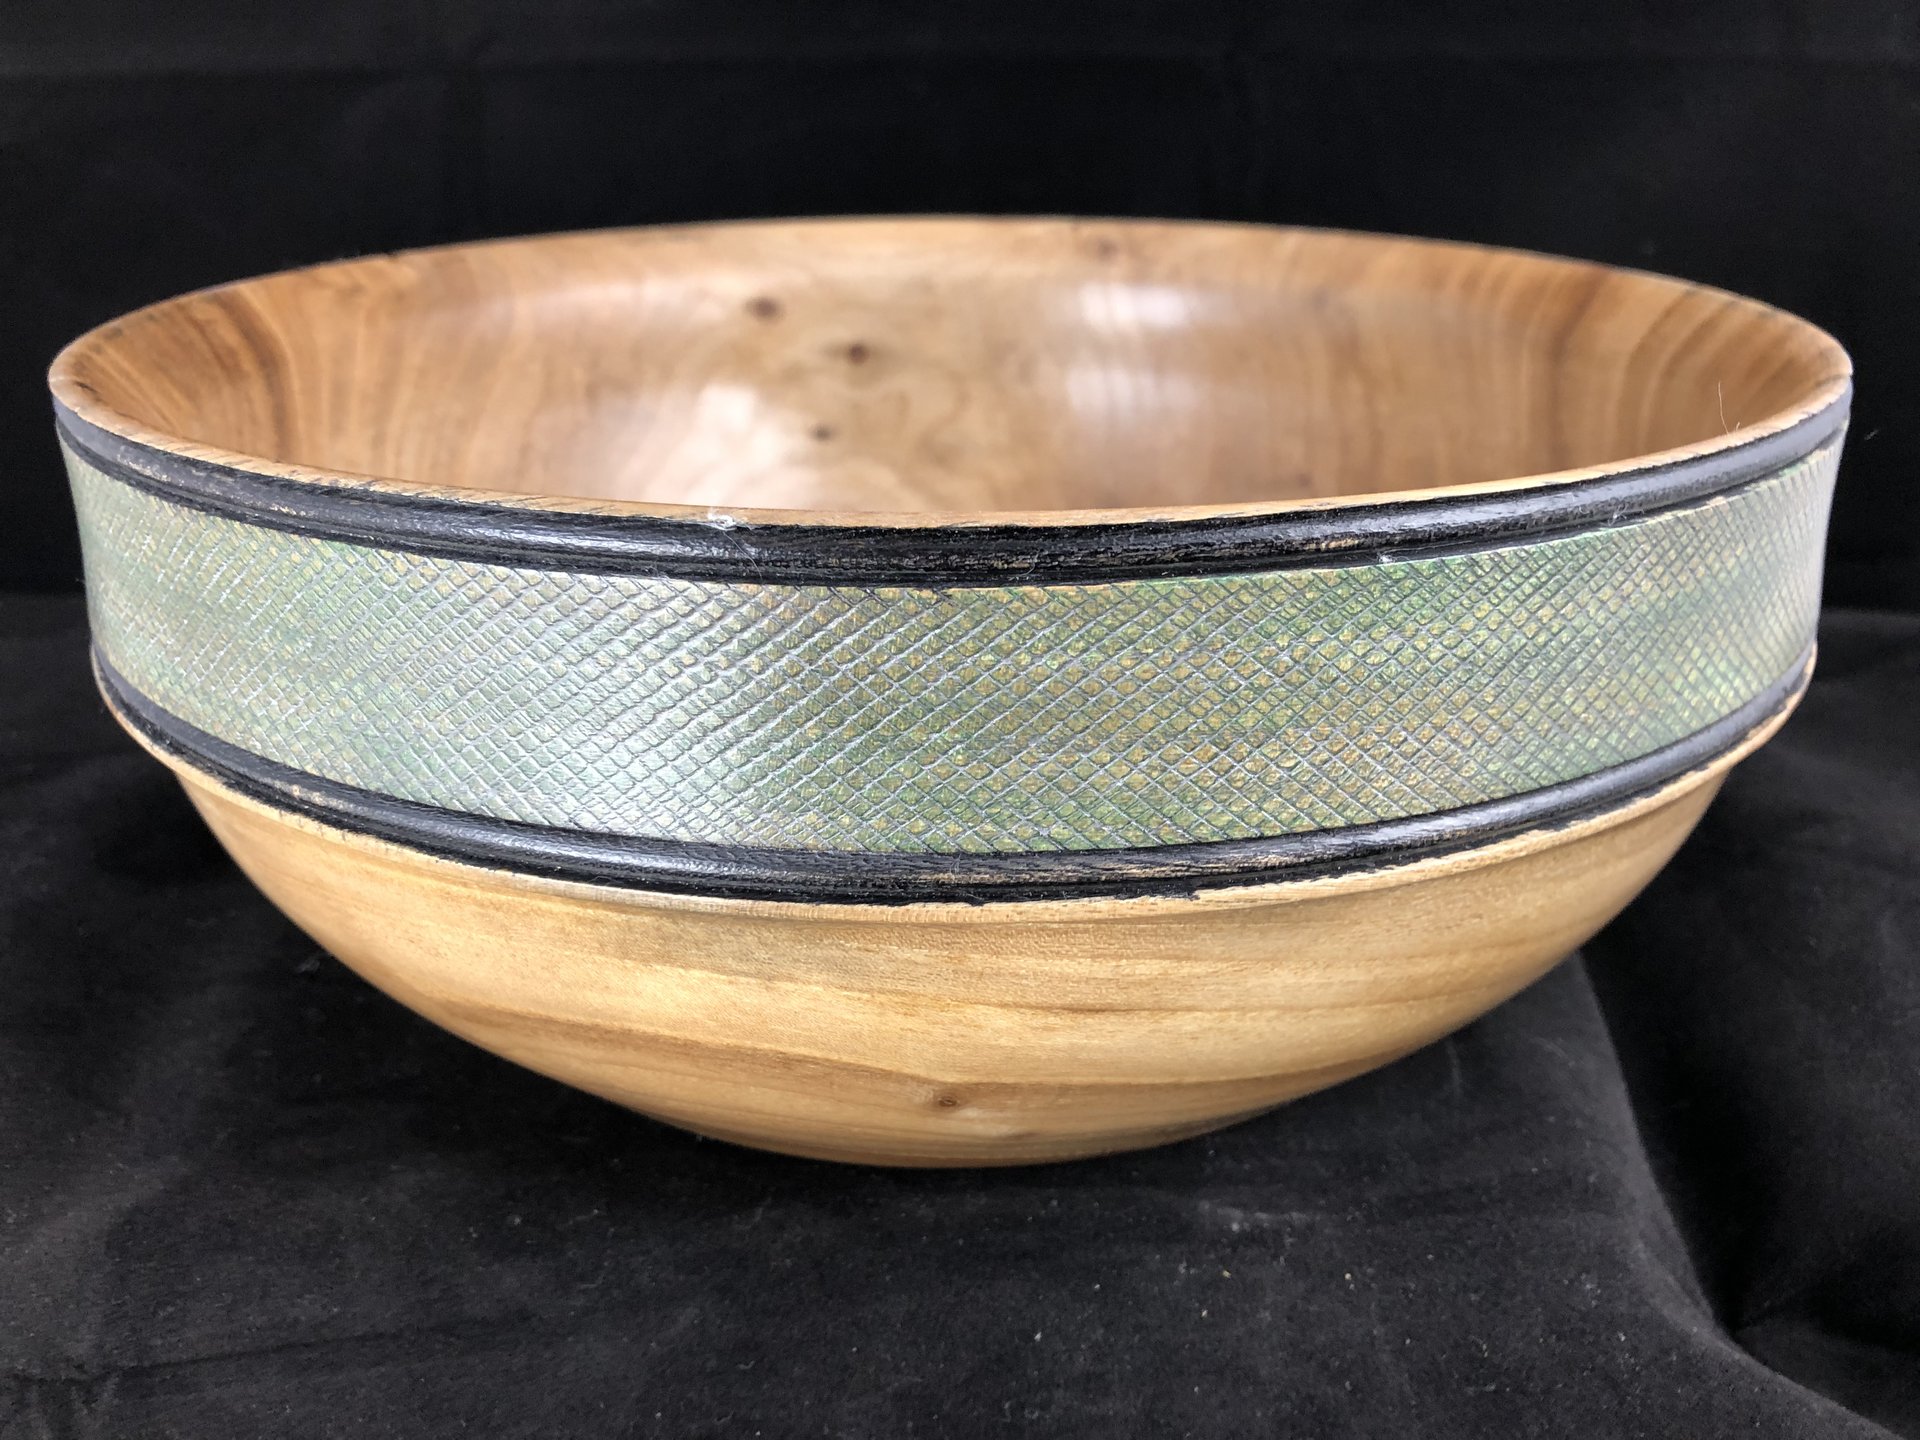 Butternut bowl with dye and wax